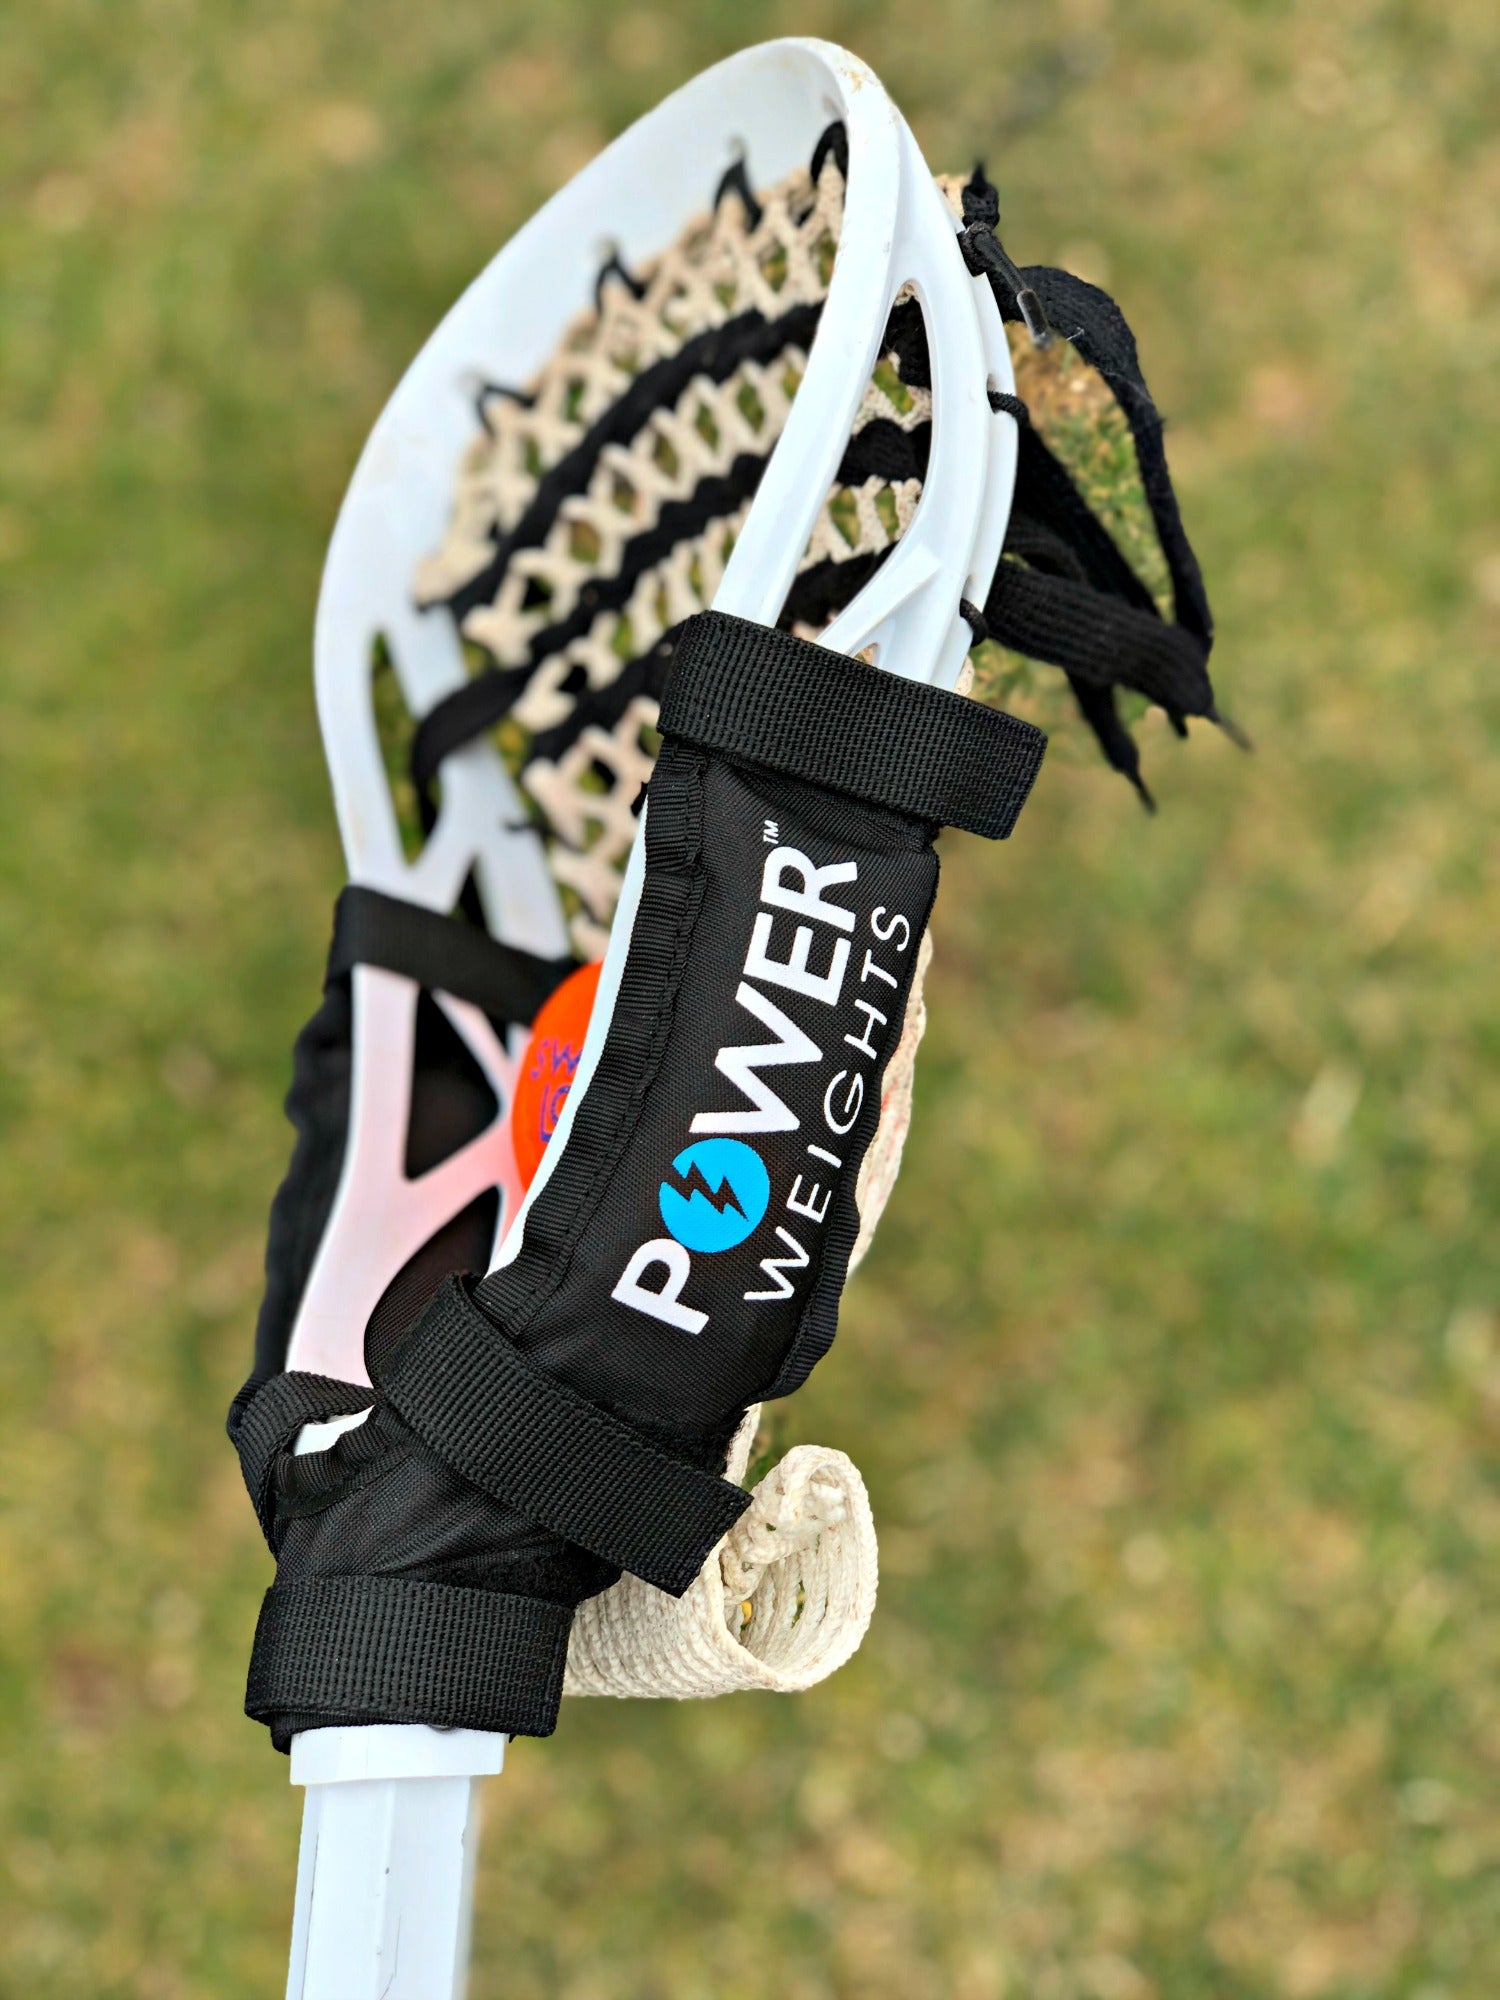 Swax Lax Power Weights shown on boy's lacrosse stick - side view